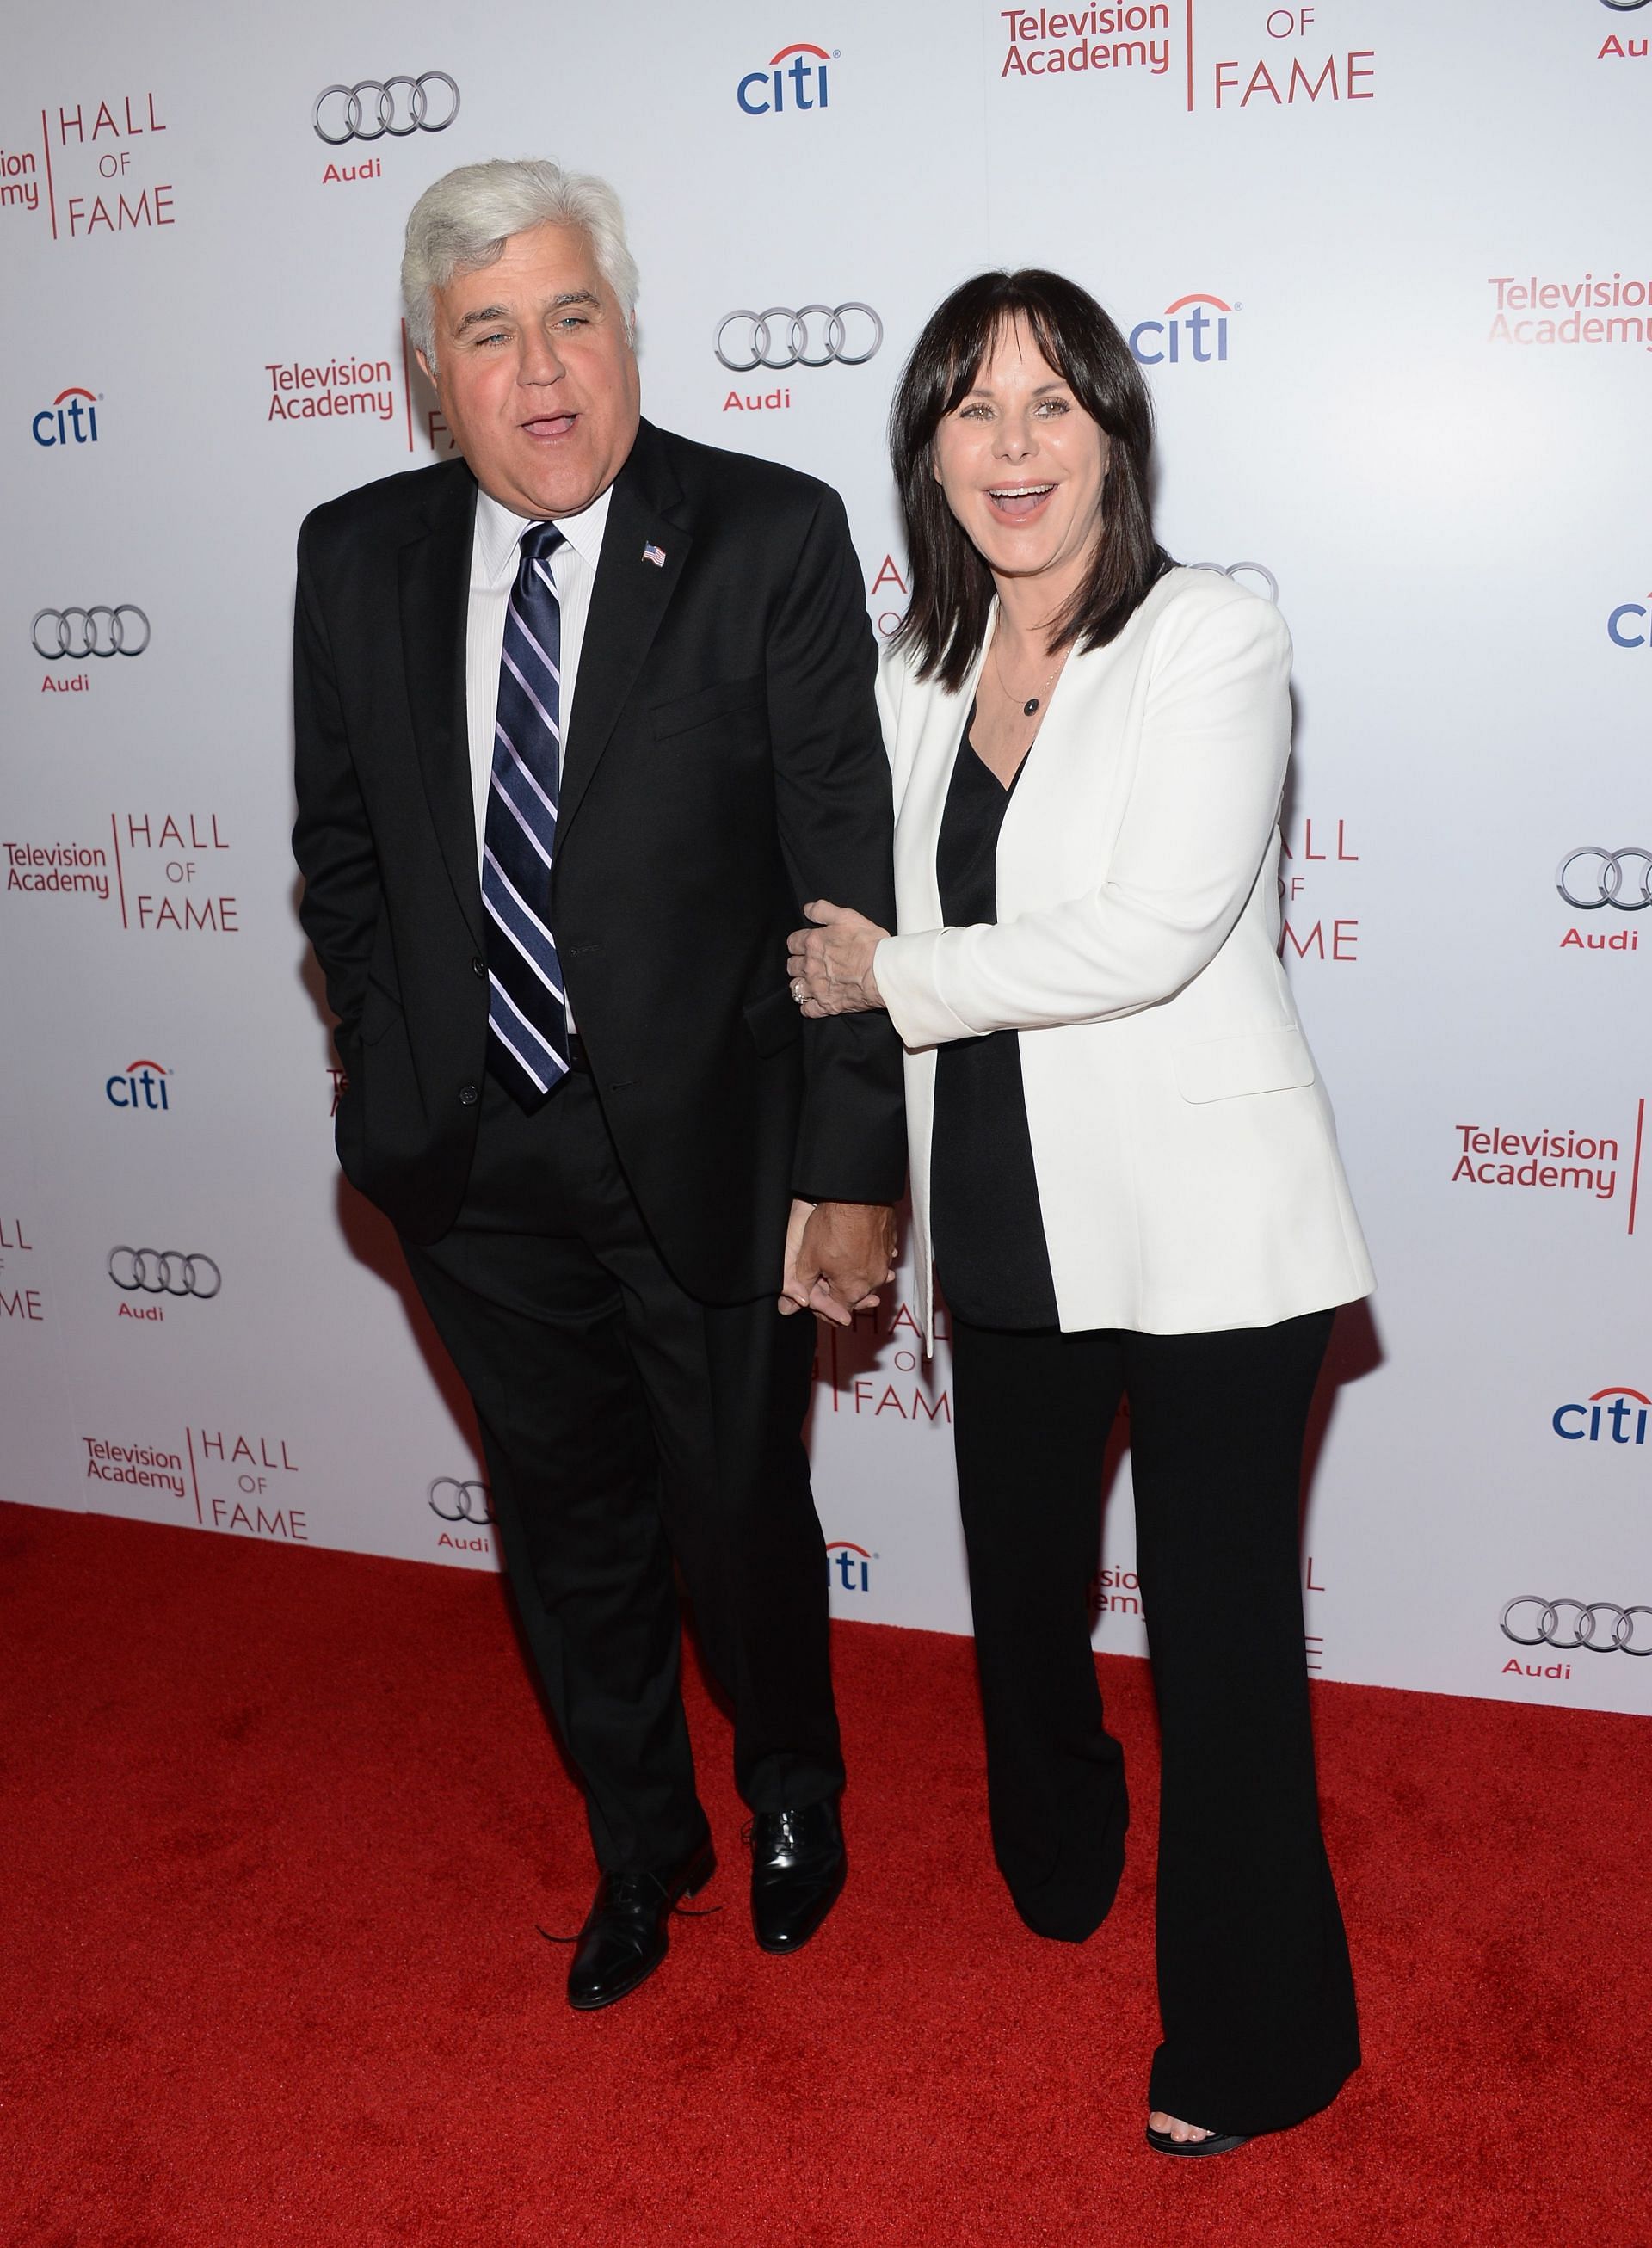 Leno had filed for conservatorship in January (Image via Getty Images)